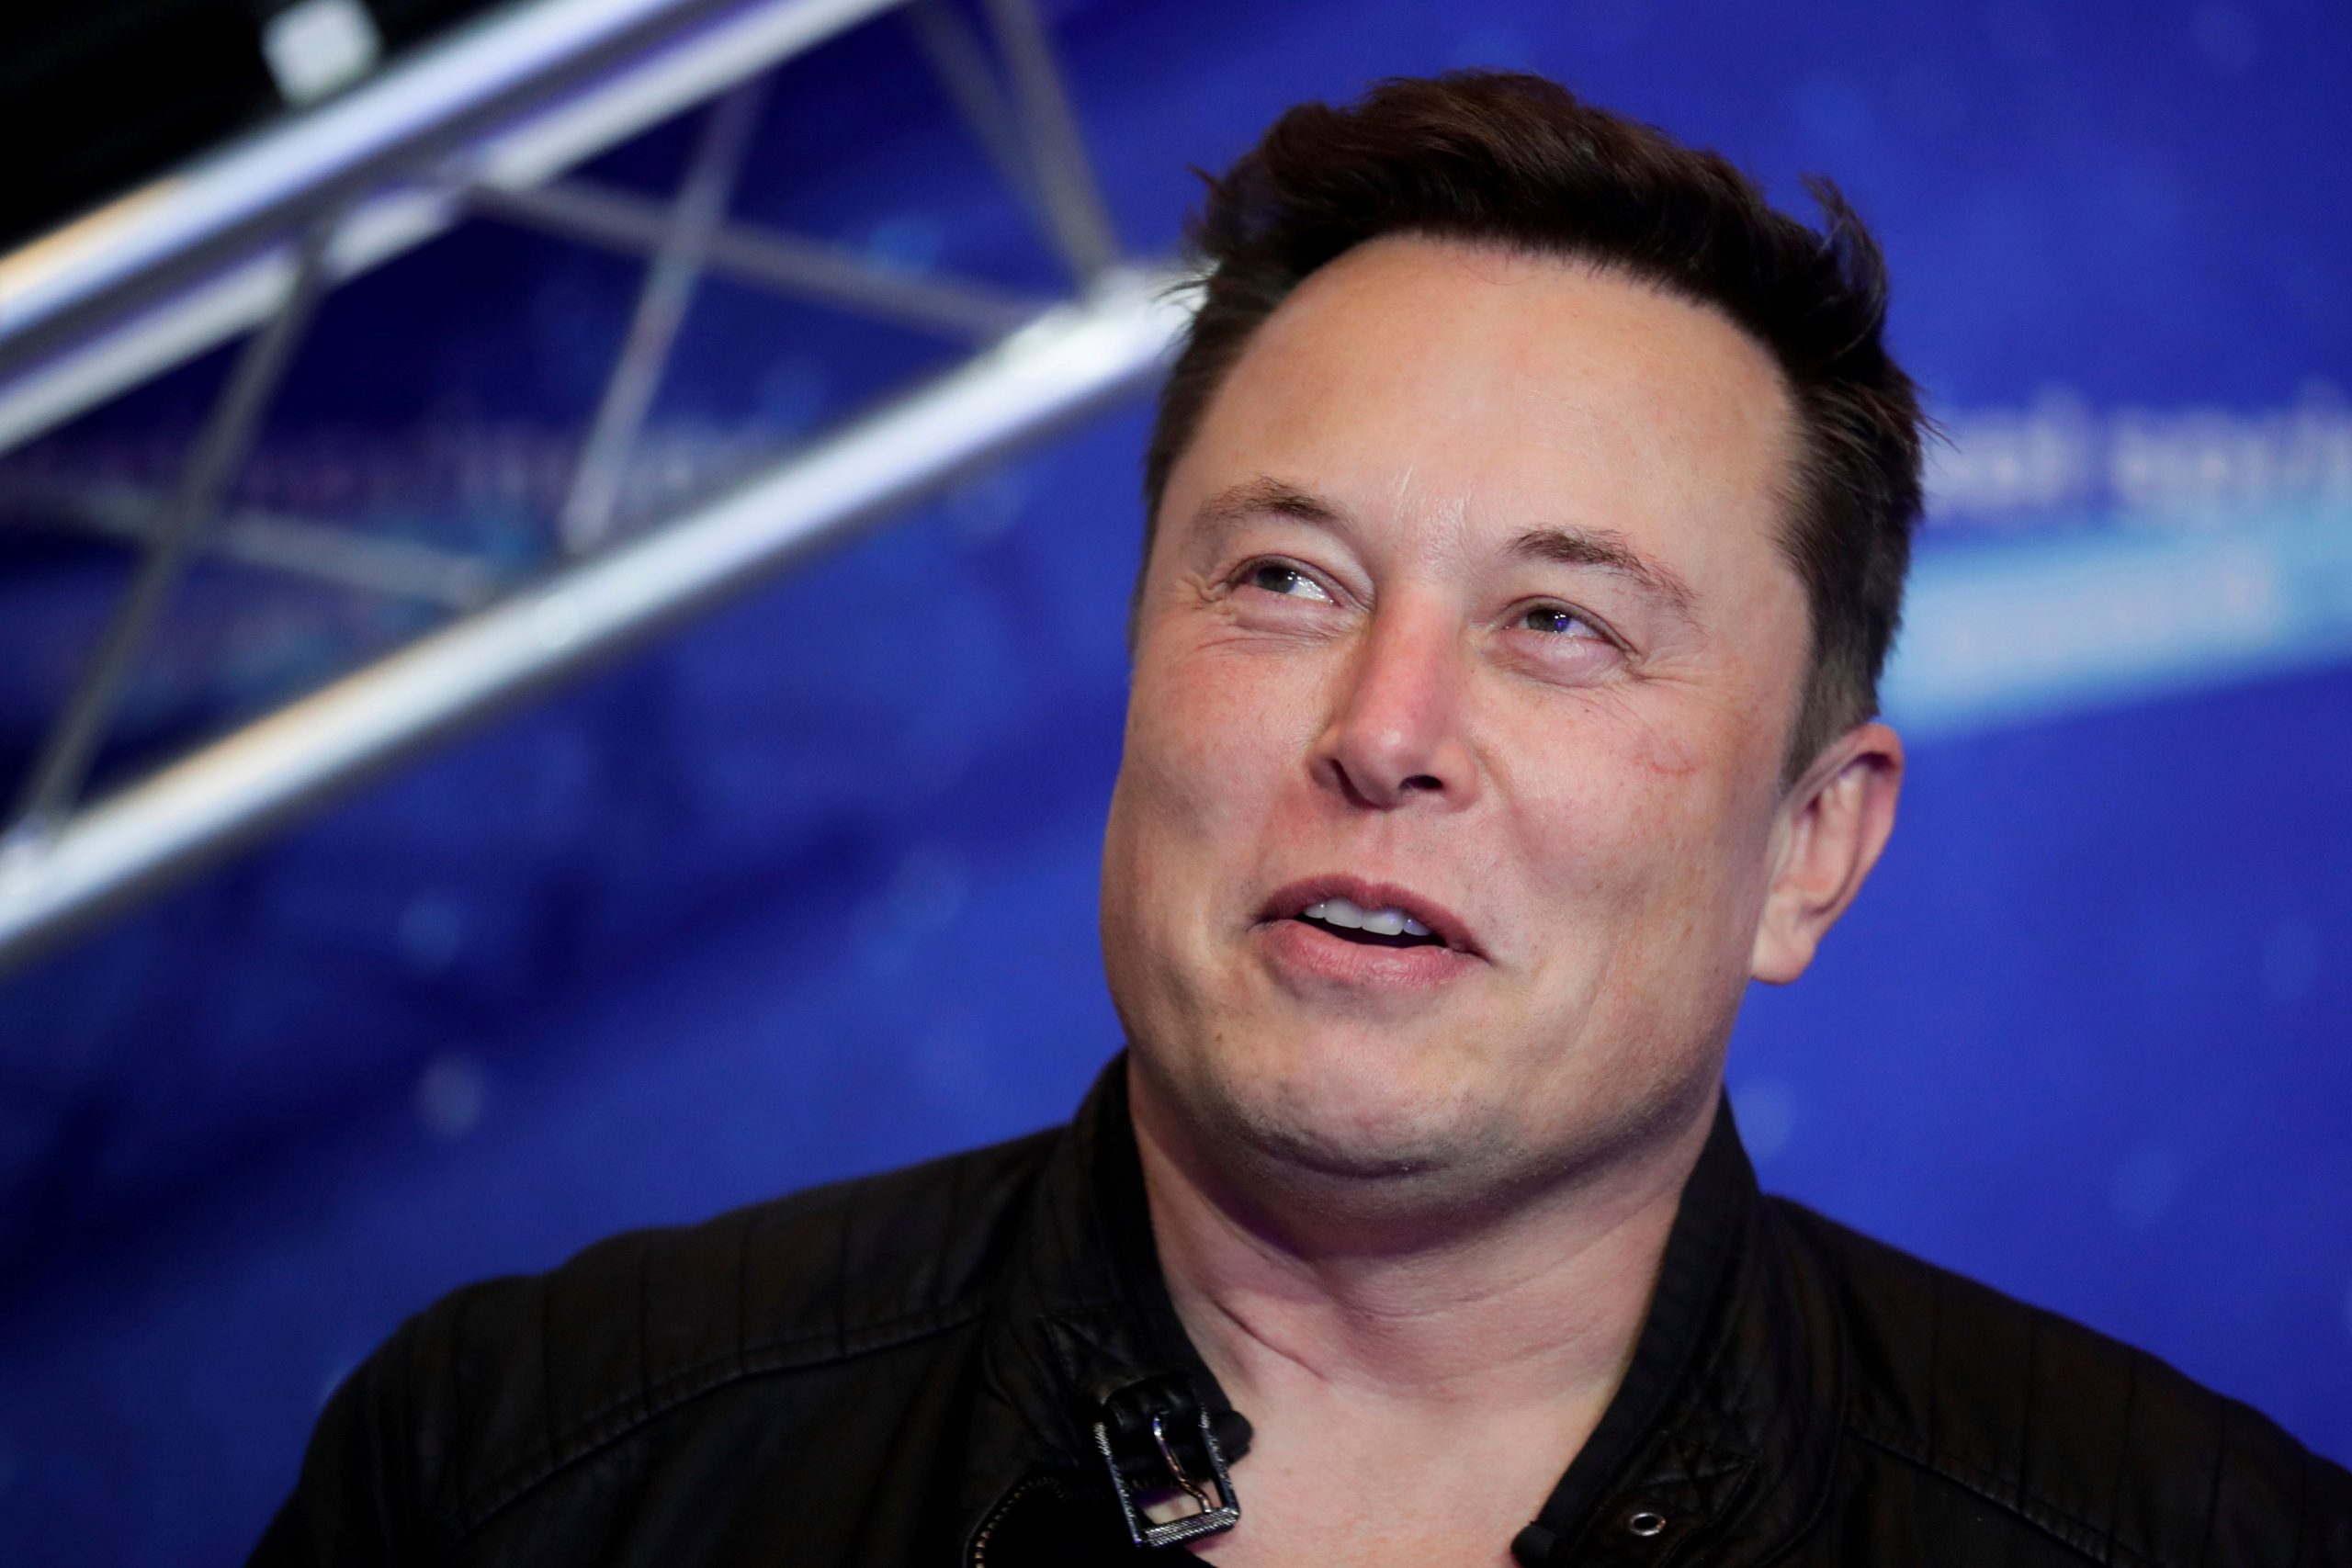 What is ‘deep time’ that Elon Musk is thinking about